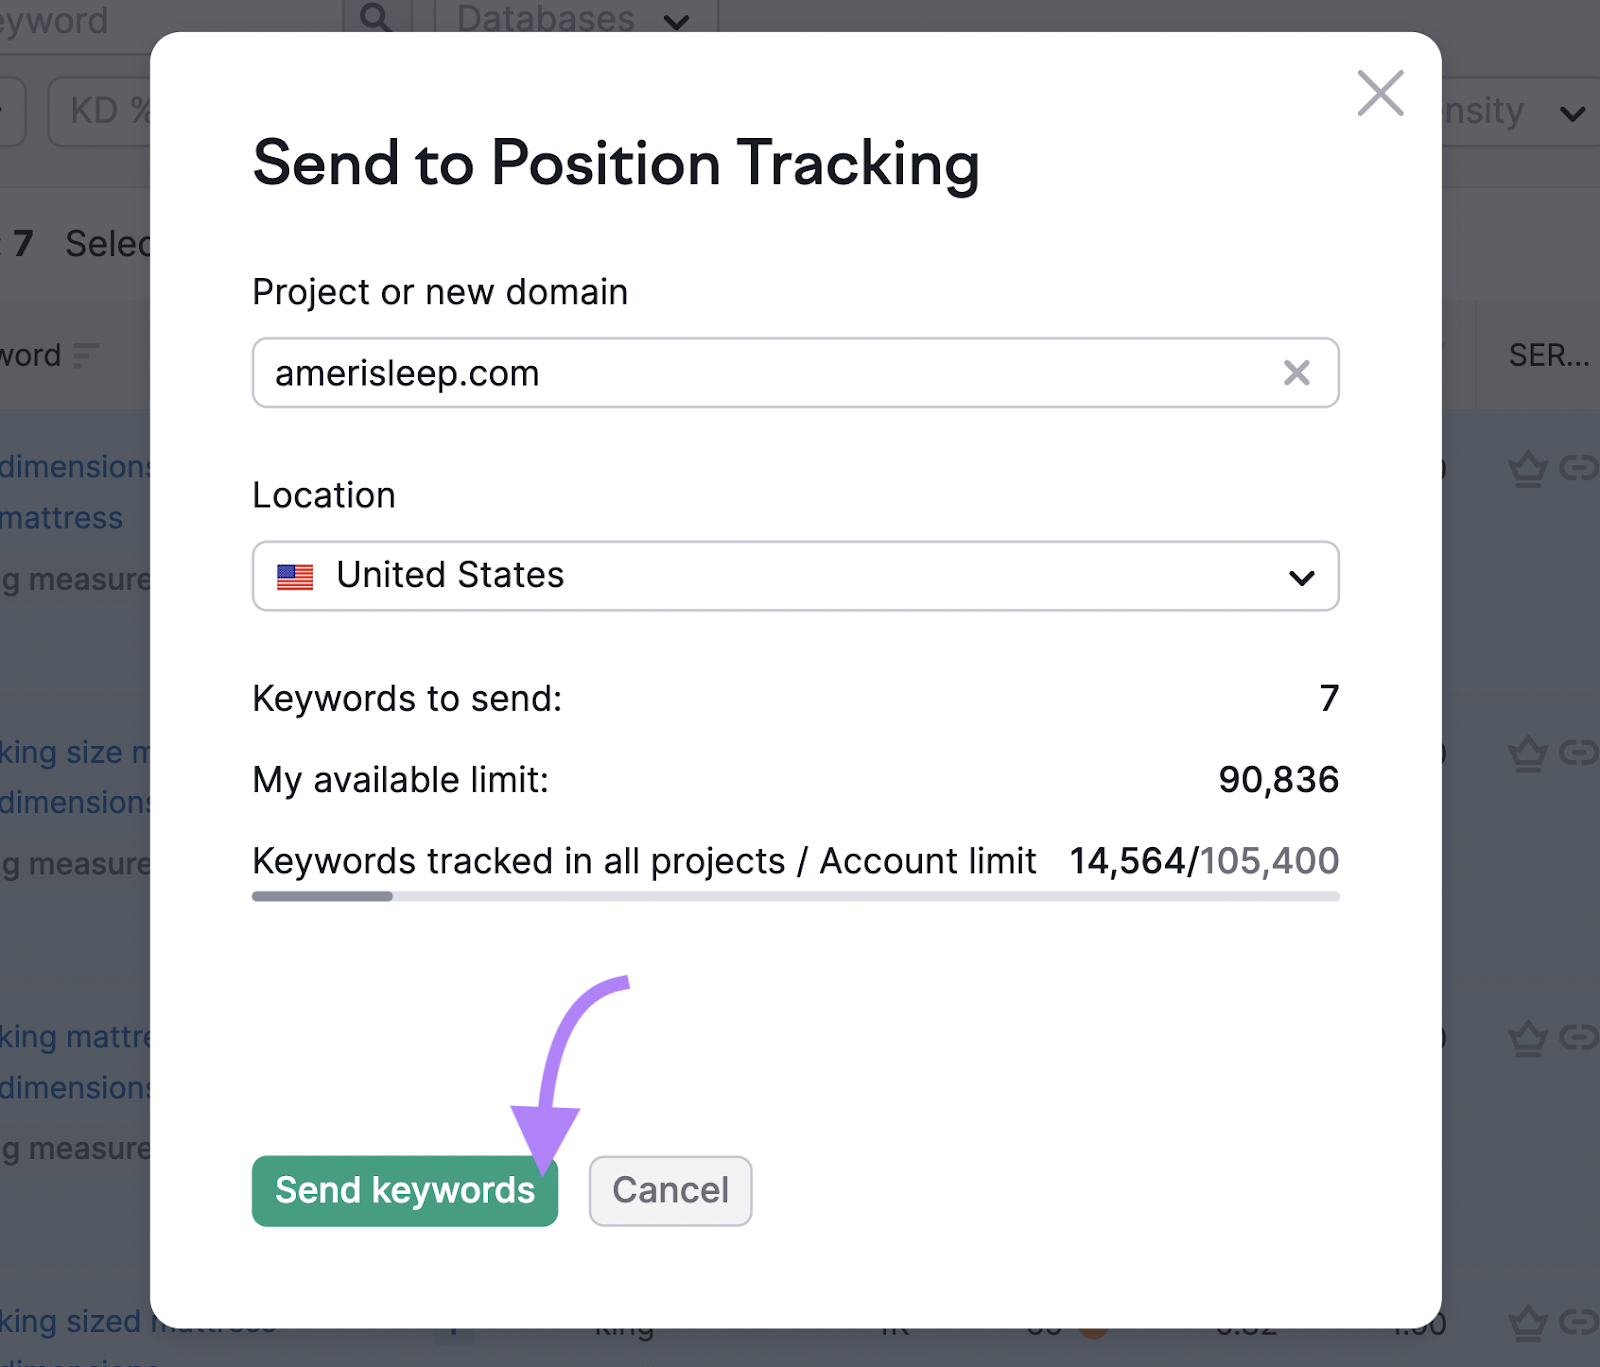 Send keywords to Position Tracking